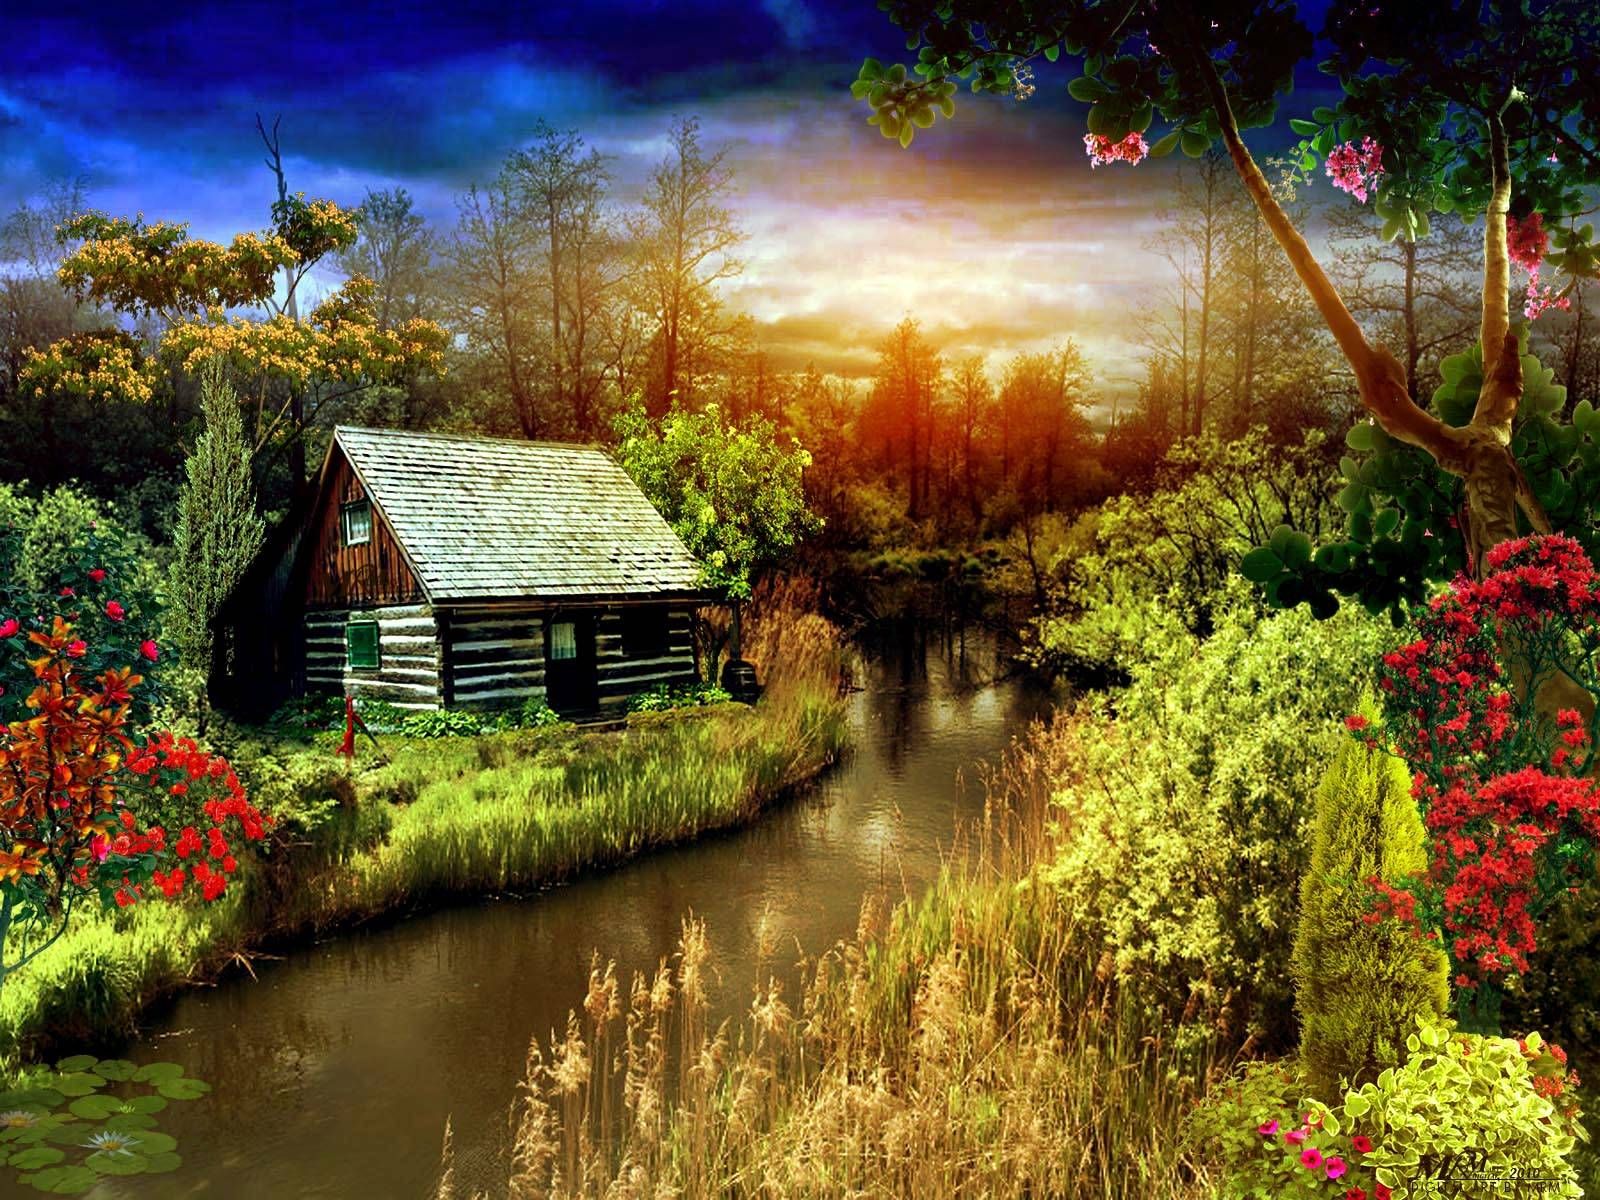 Beautiful Colorful Morning Near The River Wallpaper Most